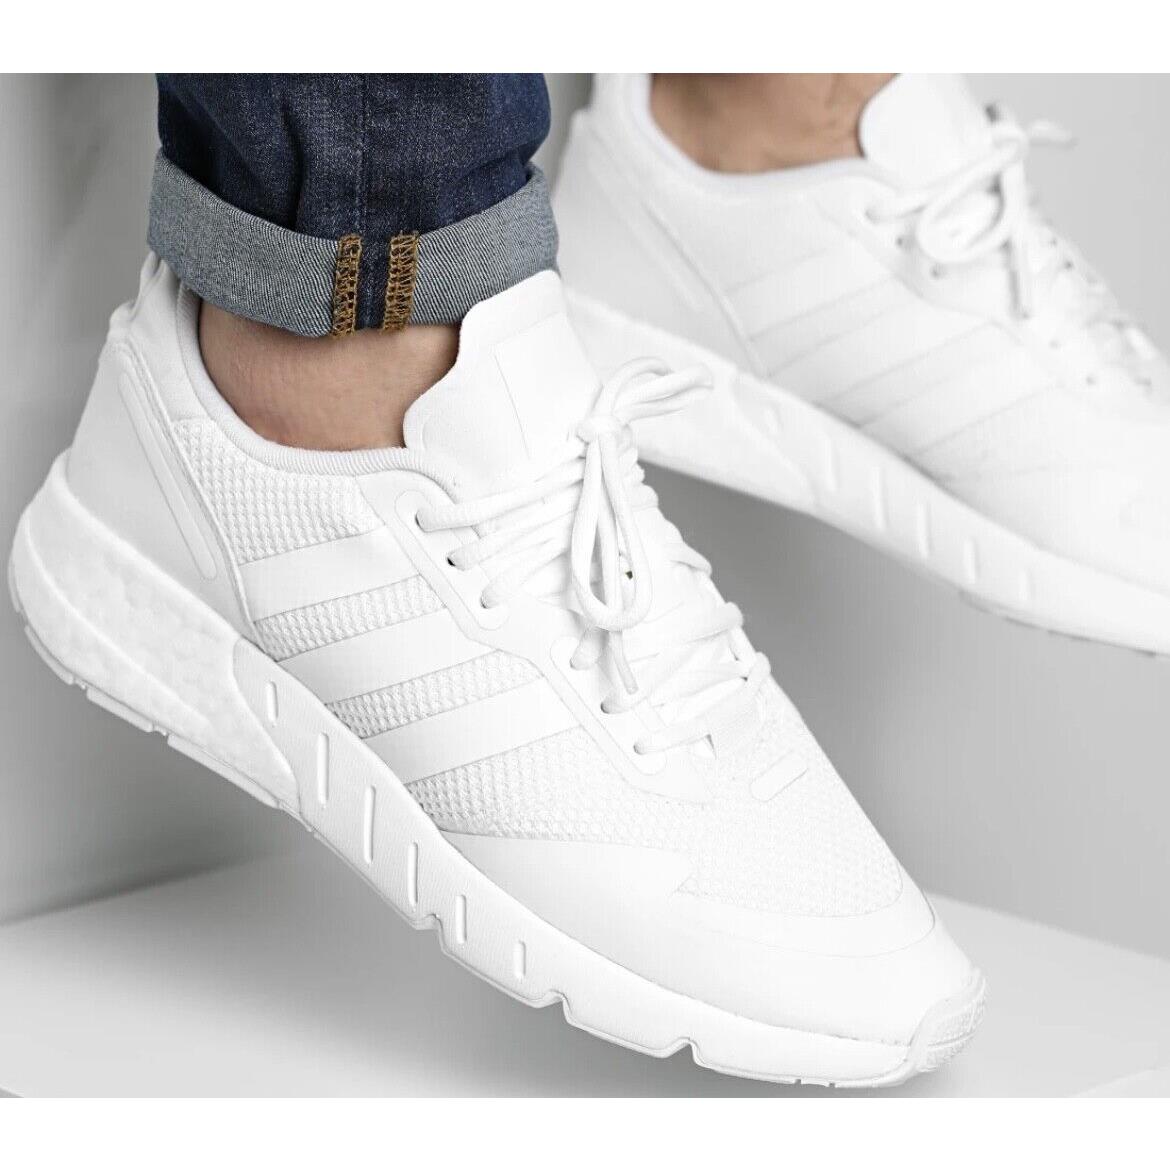 Cambio Peligro mañana Adidas ZX 1K Boost Men Casual Running Shoe White Athletic Trainer Sneaker |  692740467023 - Adidas shoes Boost - White | SporTipTop